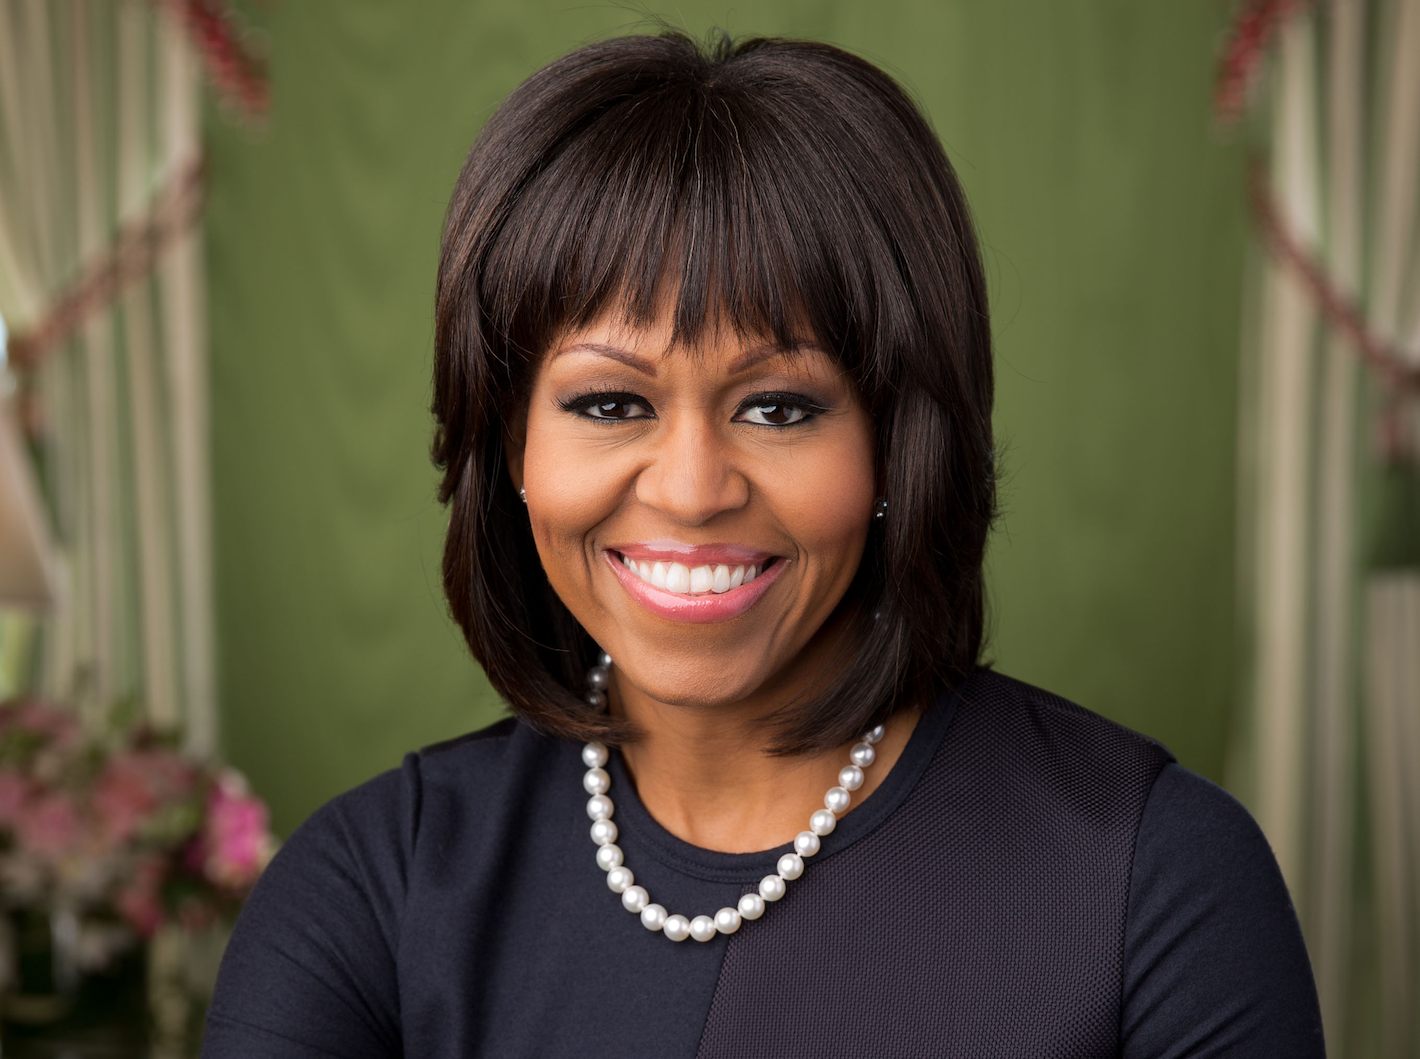 CELEBRITY BOOK REVIEW: Michelle Obama Reviews The Goldfinch by Donna Tartt  - Electric Literature